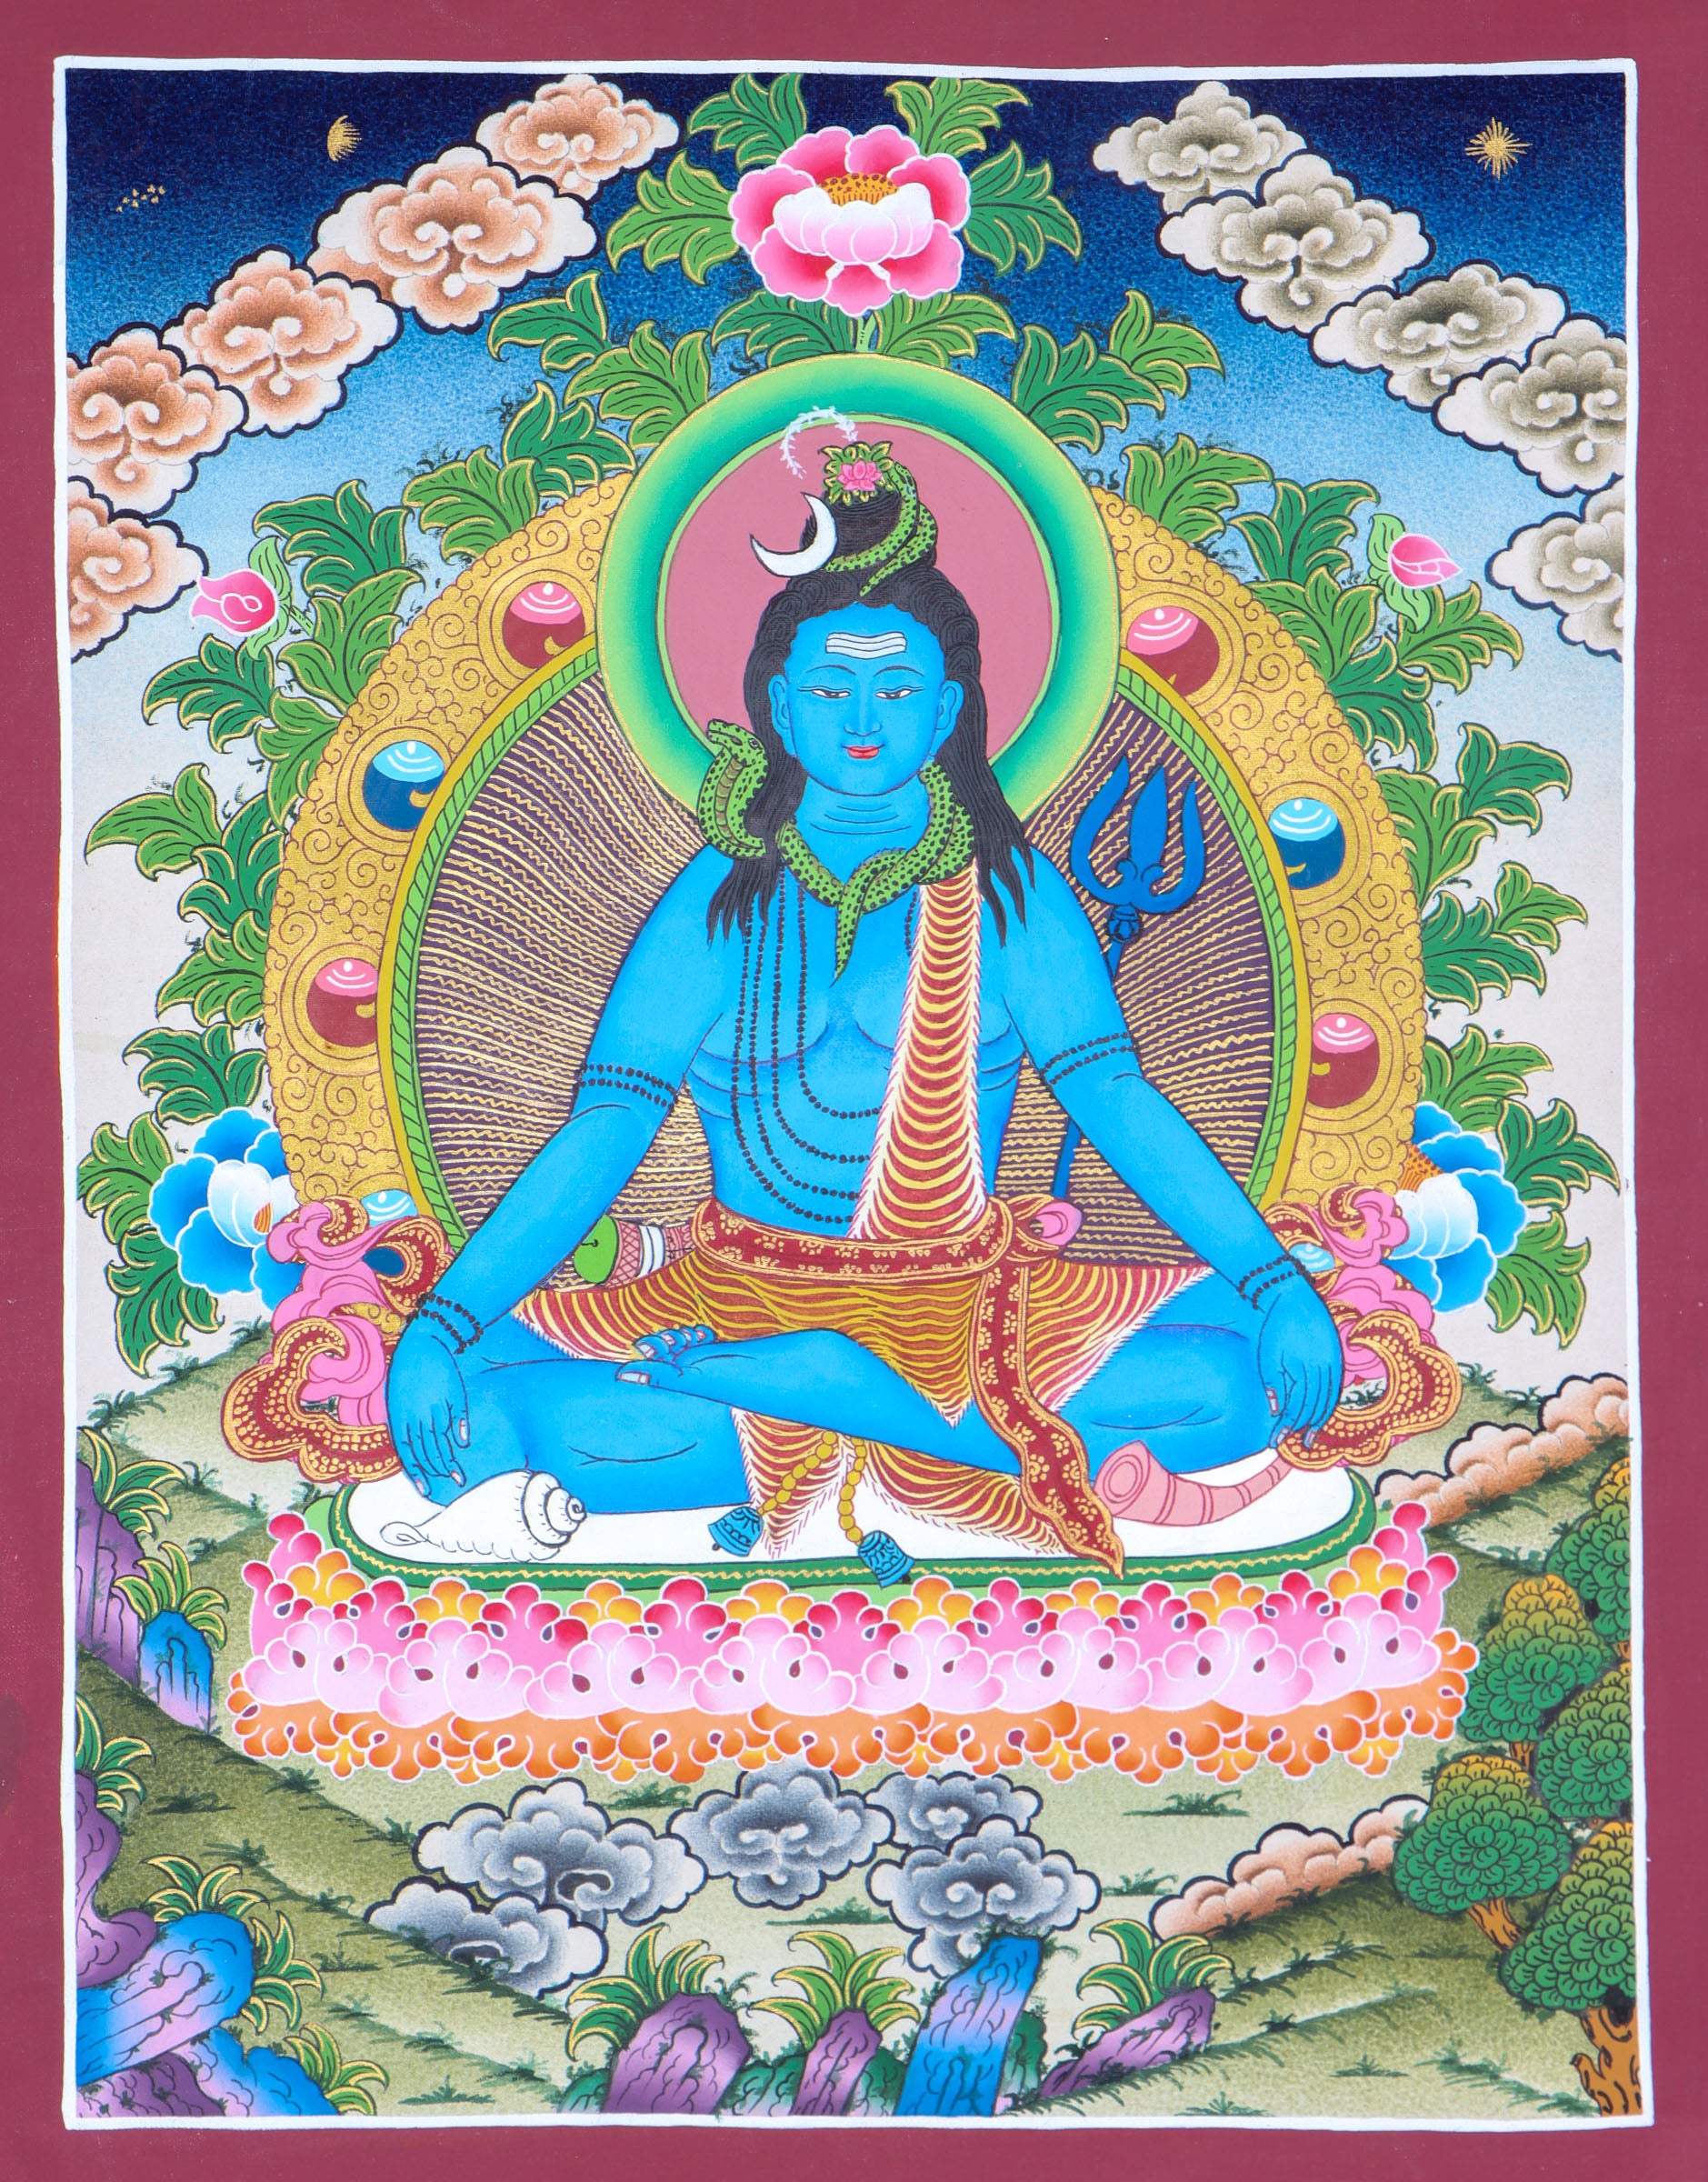 Shiva Thangka for knowledge, meditation, and enlightenment.